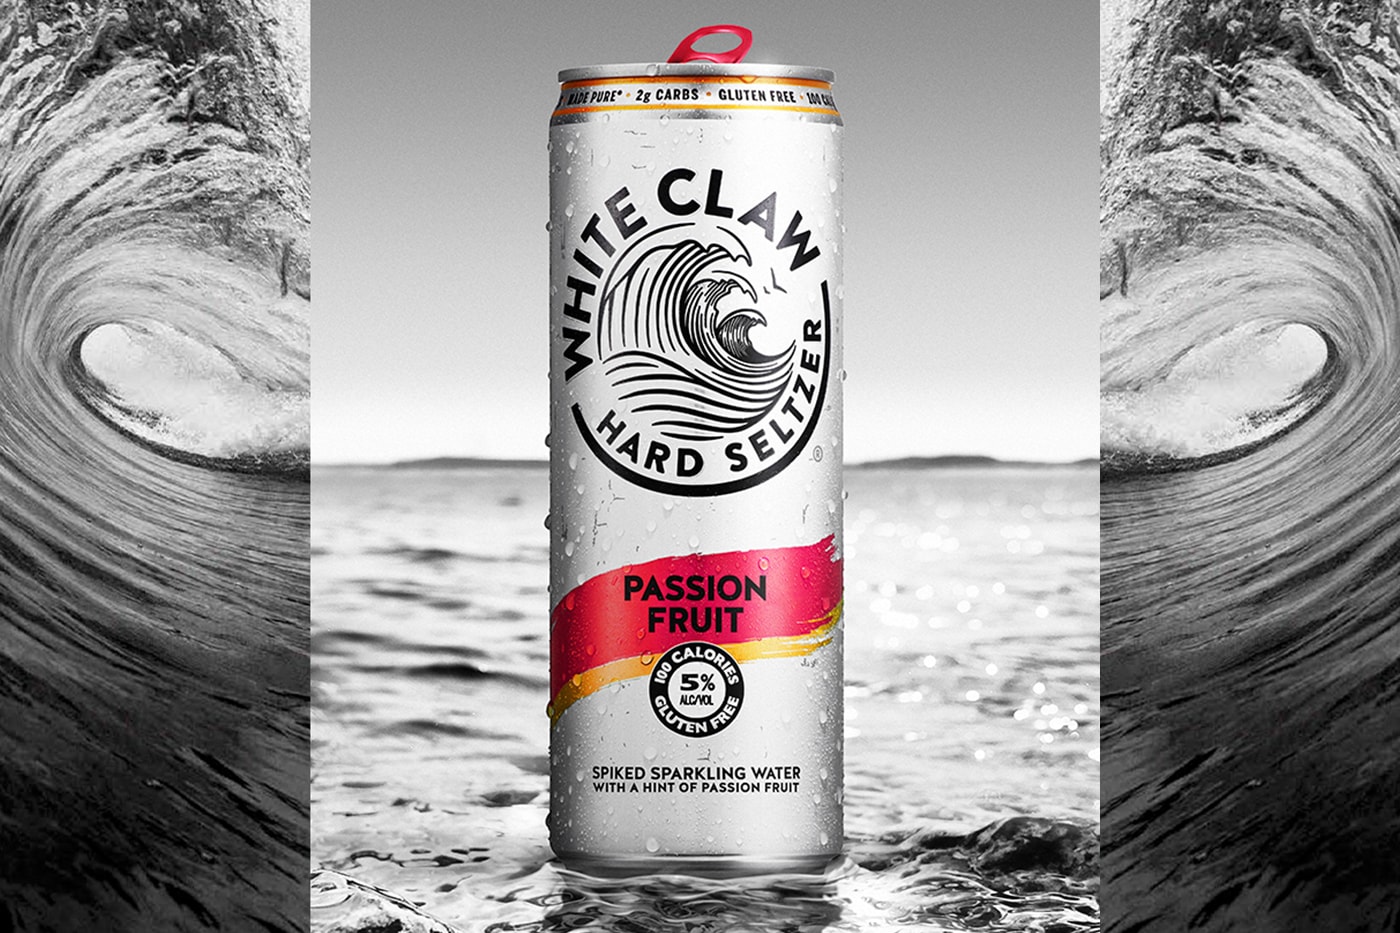 White Claw Hard Seltzer Passion Fruit Launch Taste Review